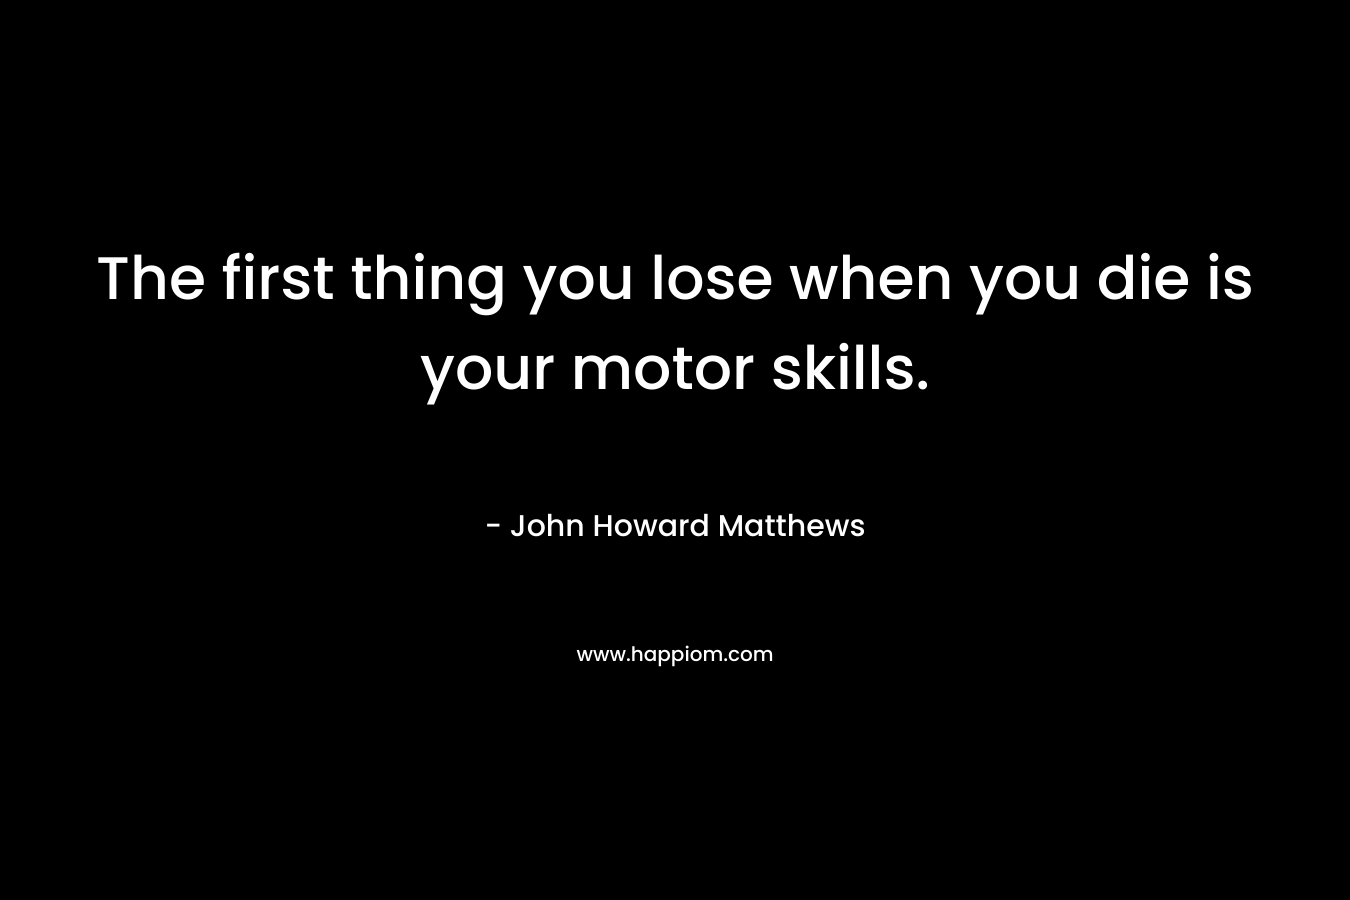 The first thing you lose when you die is your motor skills.